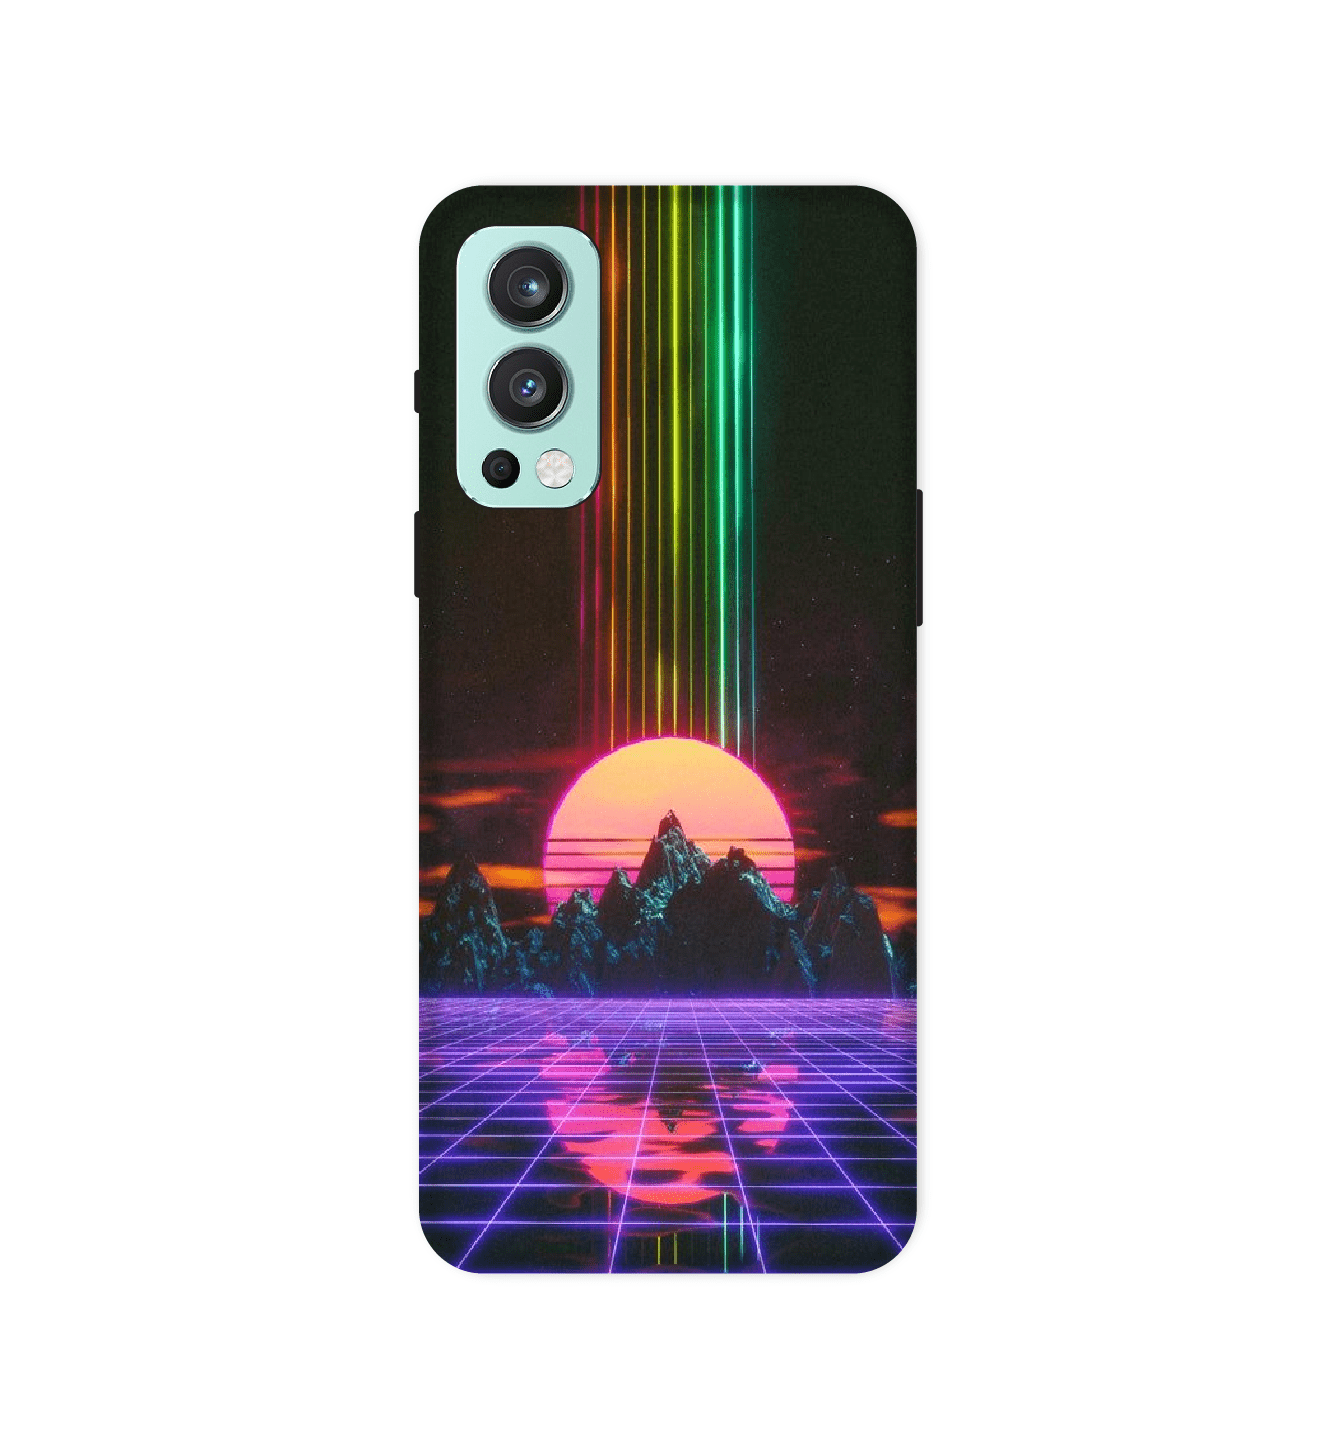 Retro Sunset Synthwave- Hard Cases For OnePlus Models